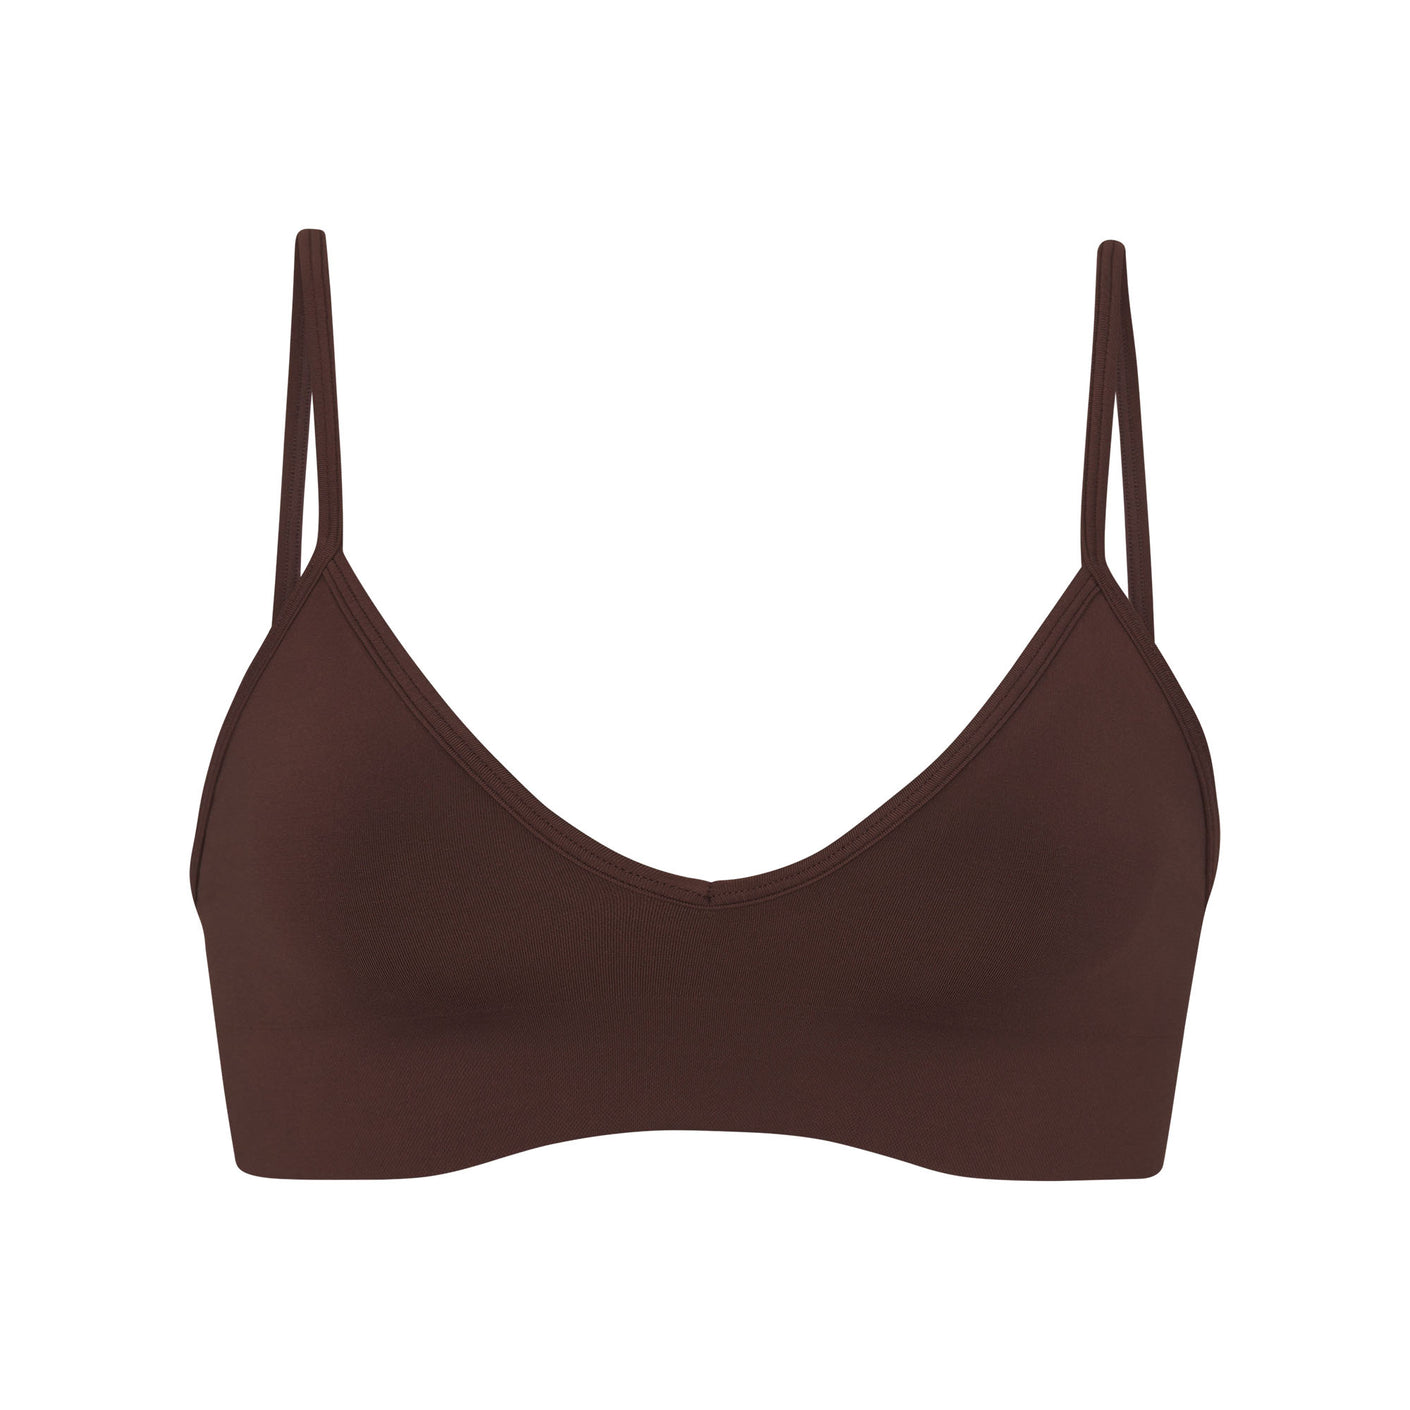 Finishing Touch Padded Bralette : Cocoa